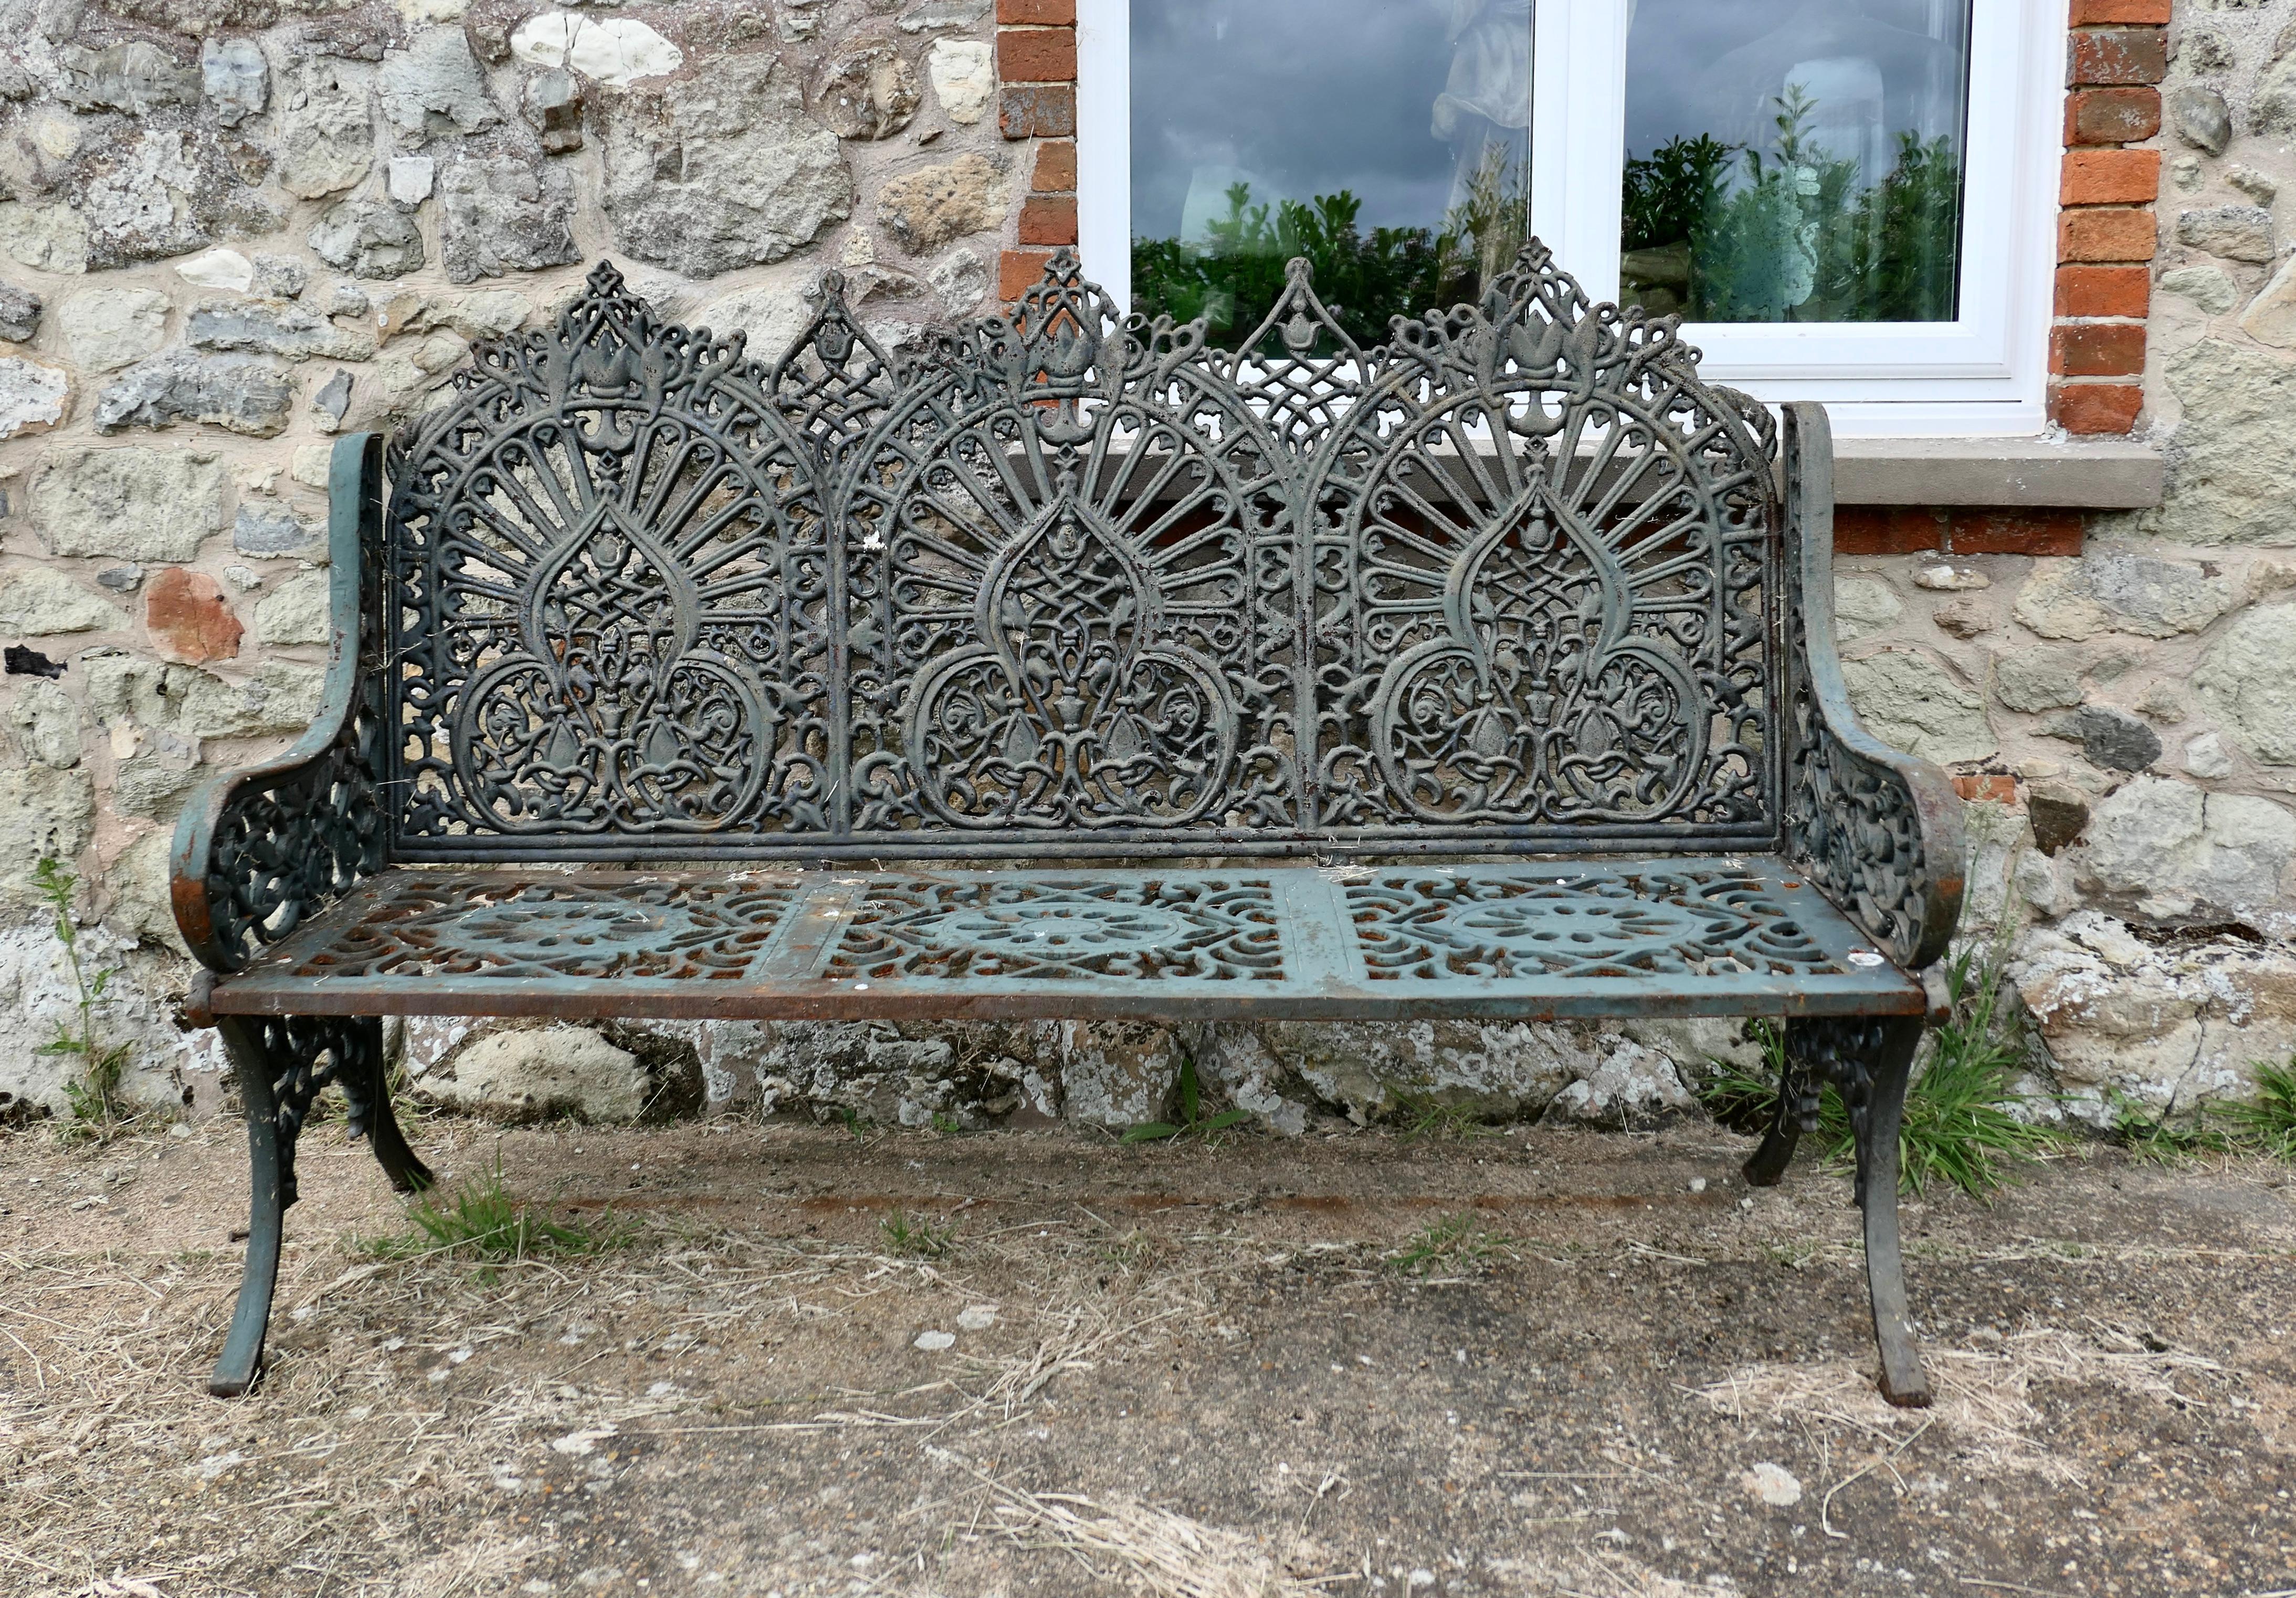 Large 19th Century Cast Iron Garden Bench 3 Seat 

This is a very decorative 19th century high quality cast iron garden seat
The bench is a roomy 3 seater, with a superbly decorative arched back, the seat itself is flat so is much more comfortable